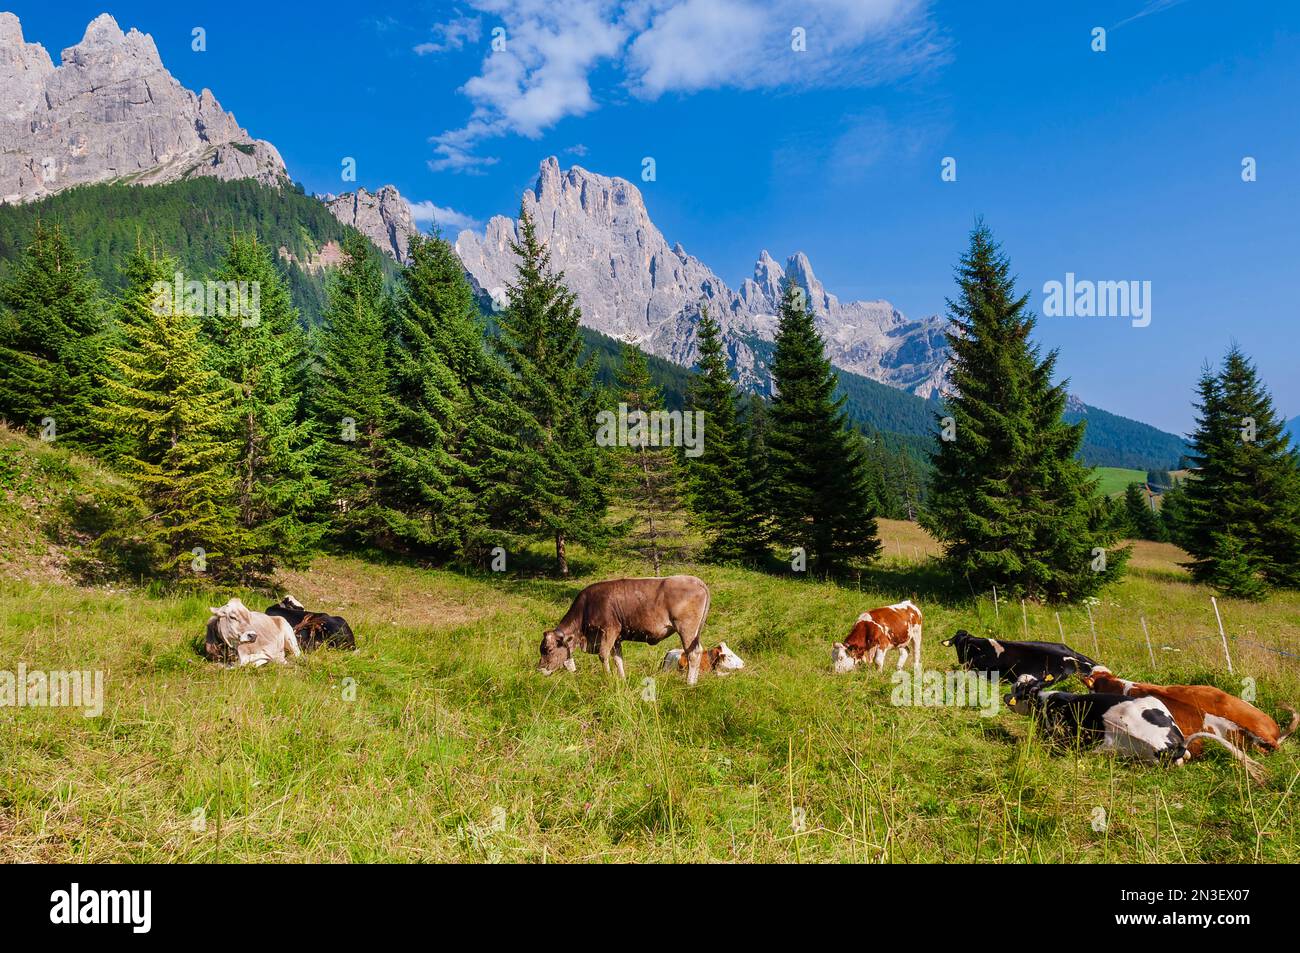 Cows grazing in the grassy mountainside in the Primiero Valley with the rocky peaks of the Pale di San Martino (Pala Group) at San Martino di Castr... Stock Photo